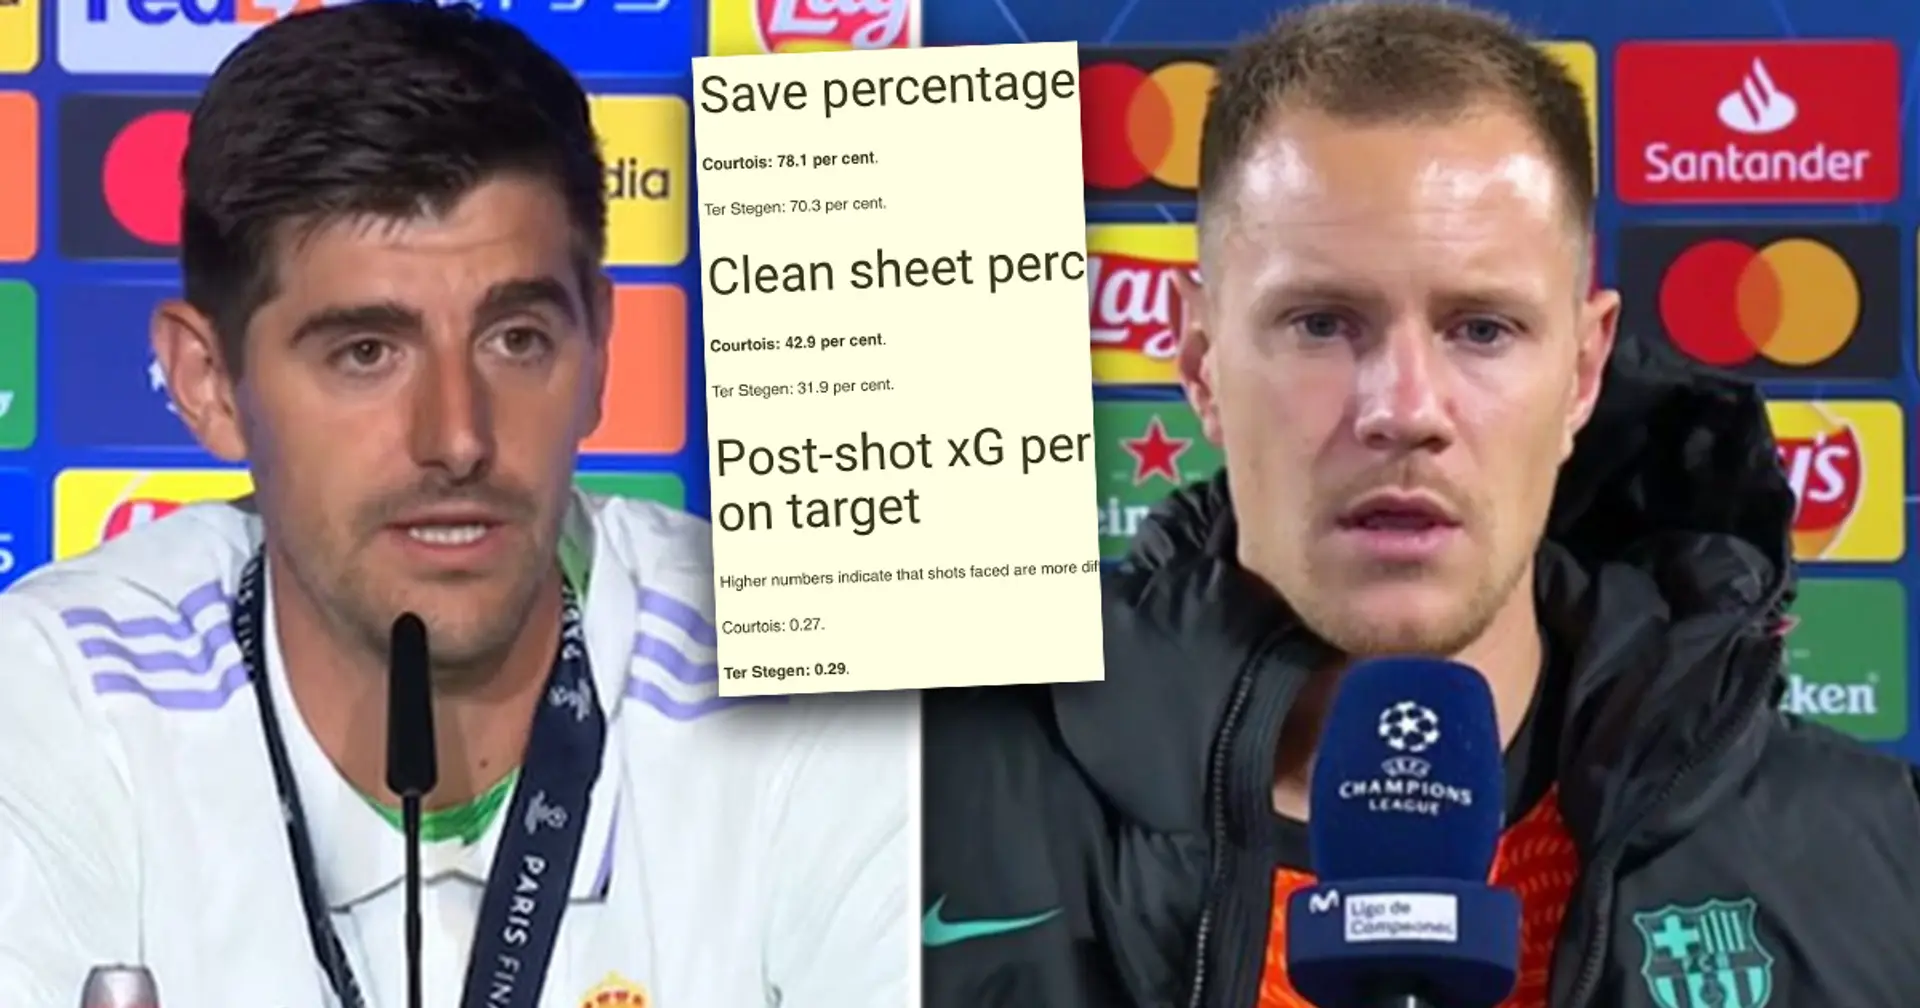 Is Courtois much better than Ter Stegen? Real Madrid and Barca goalkeepers compared